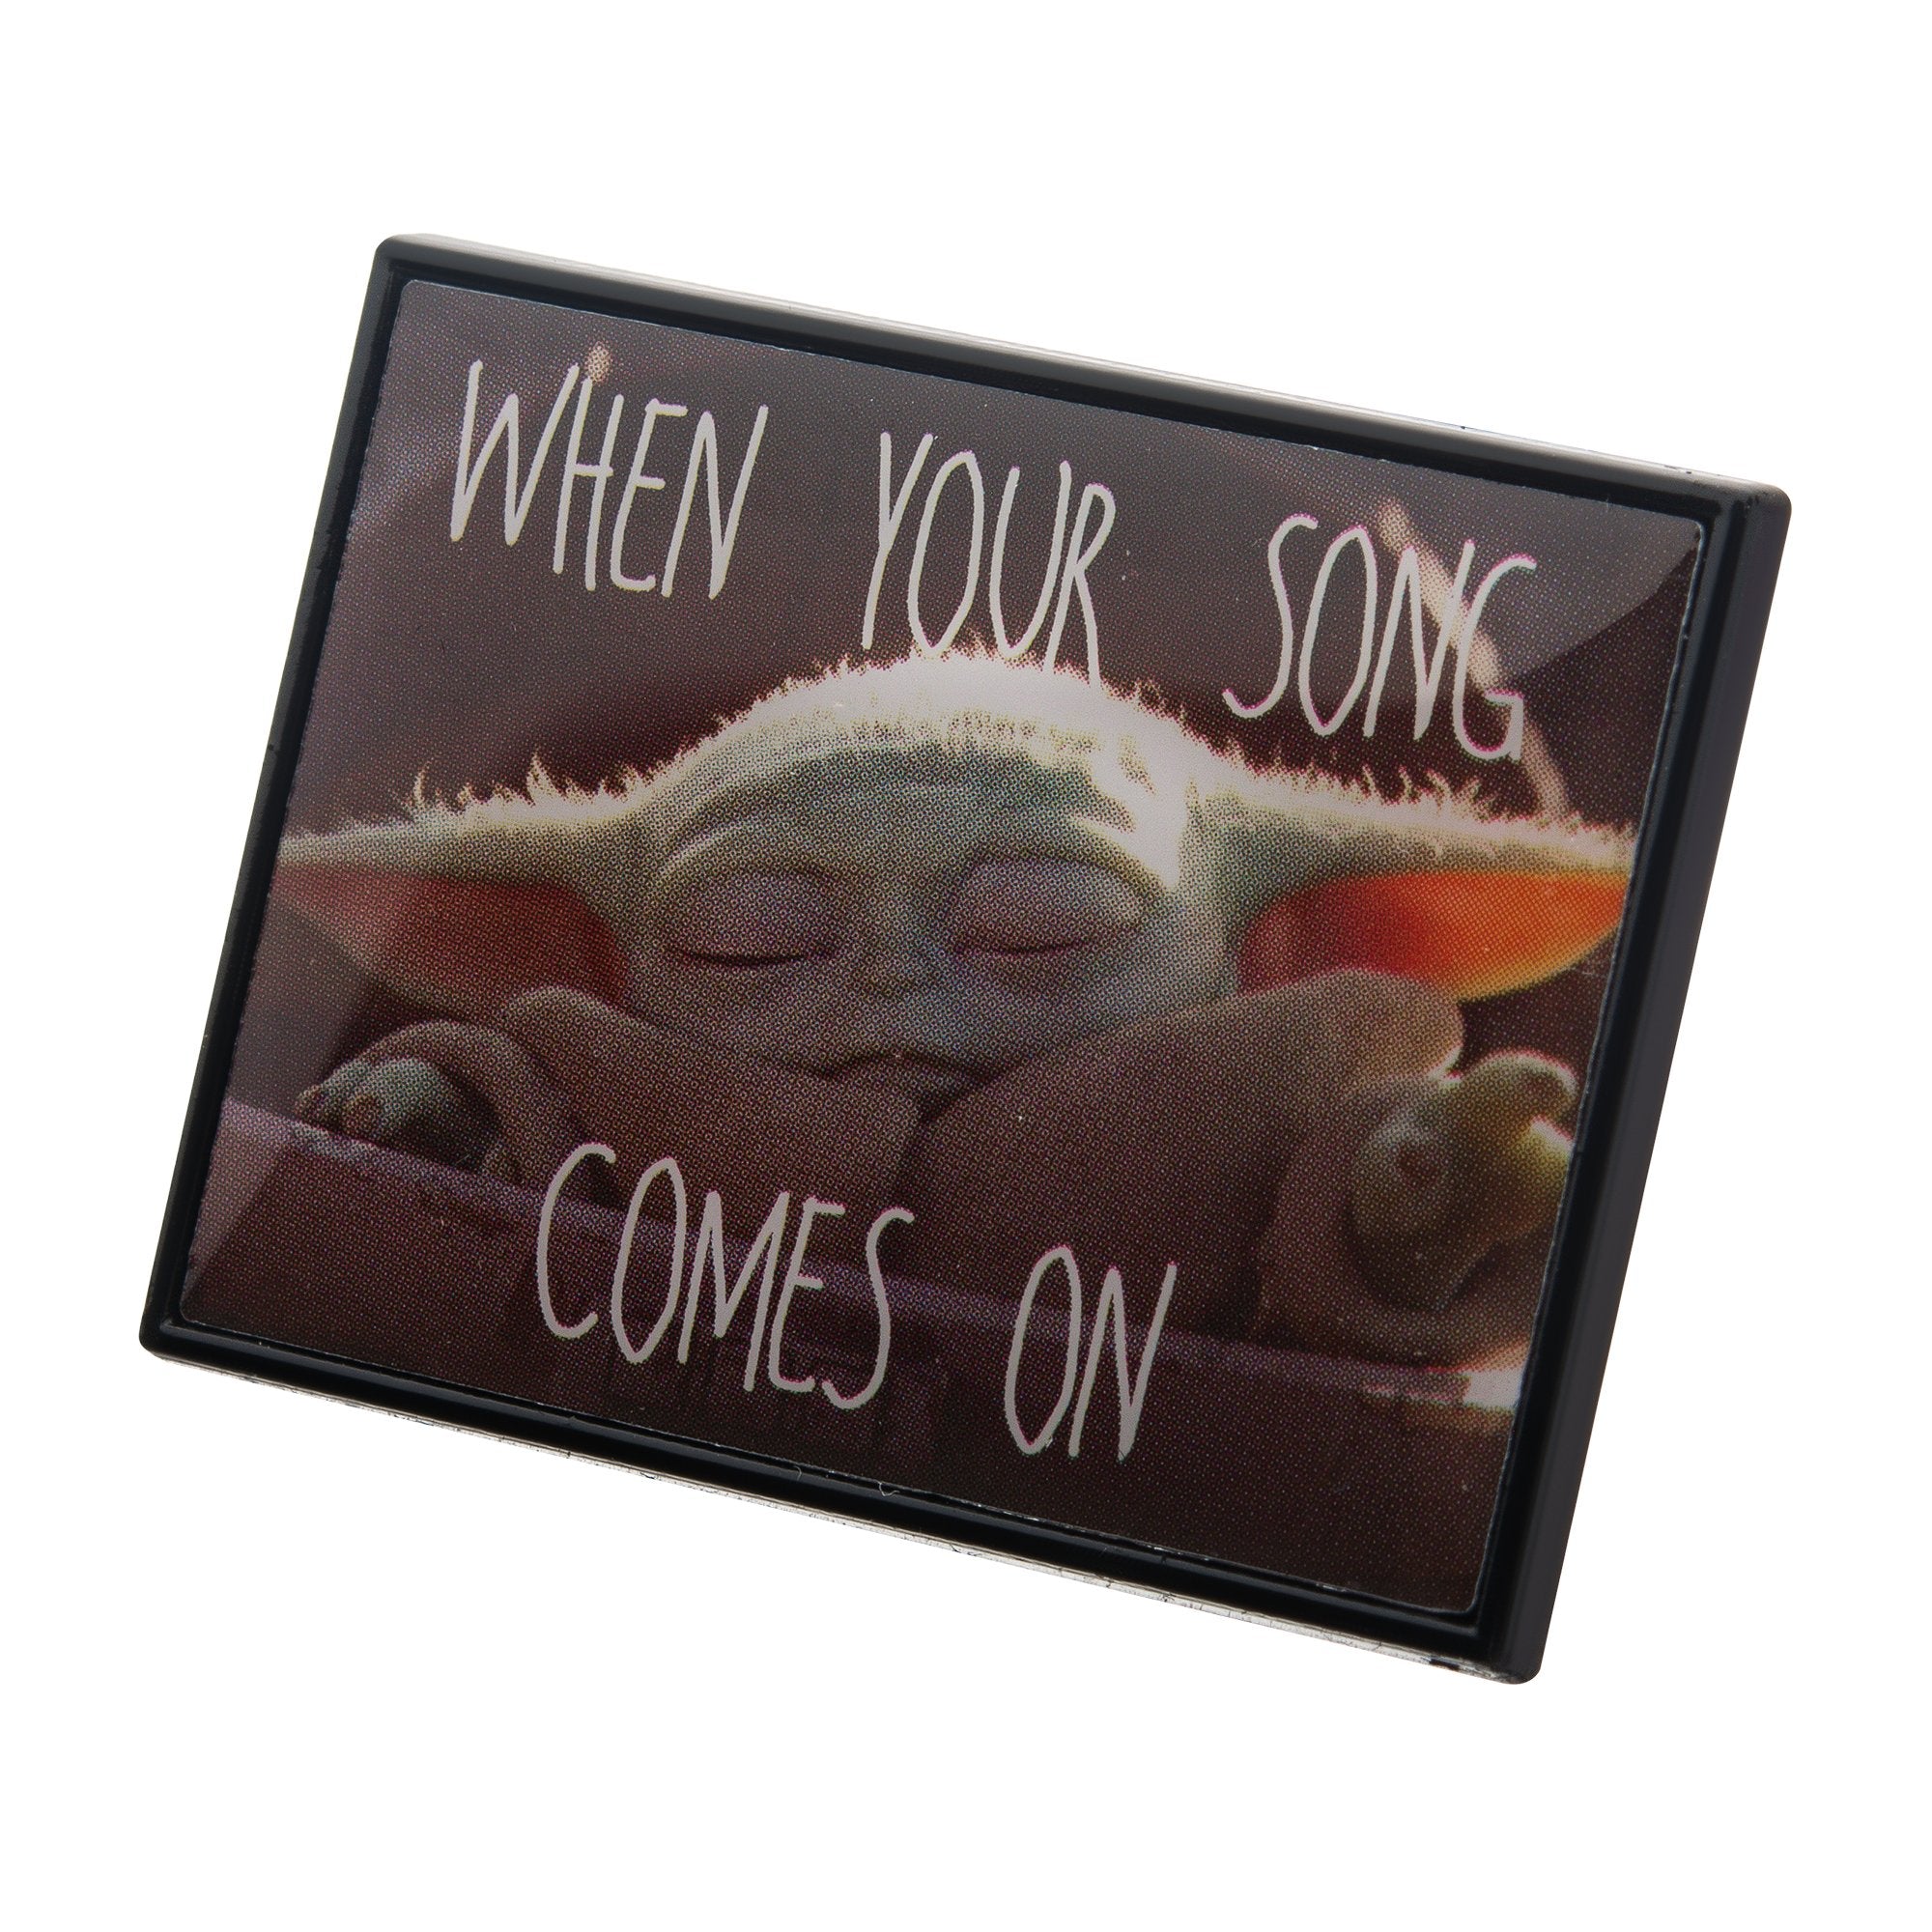 Star Wars: The Mandalorian Grogu (AKA: Baby Yoda/ The Child) "When your Song comes on" Lapel Pin